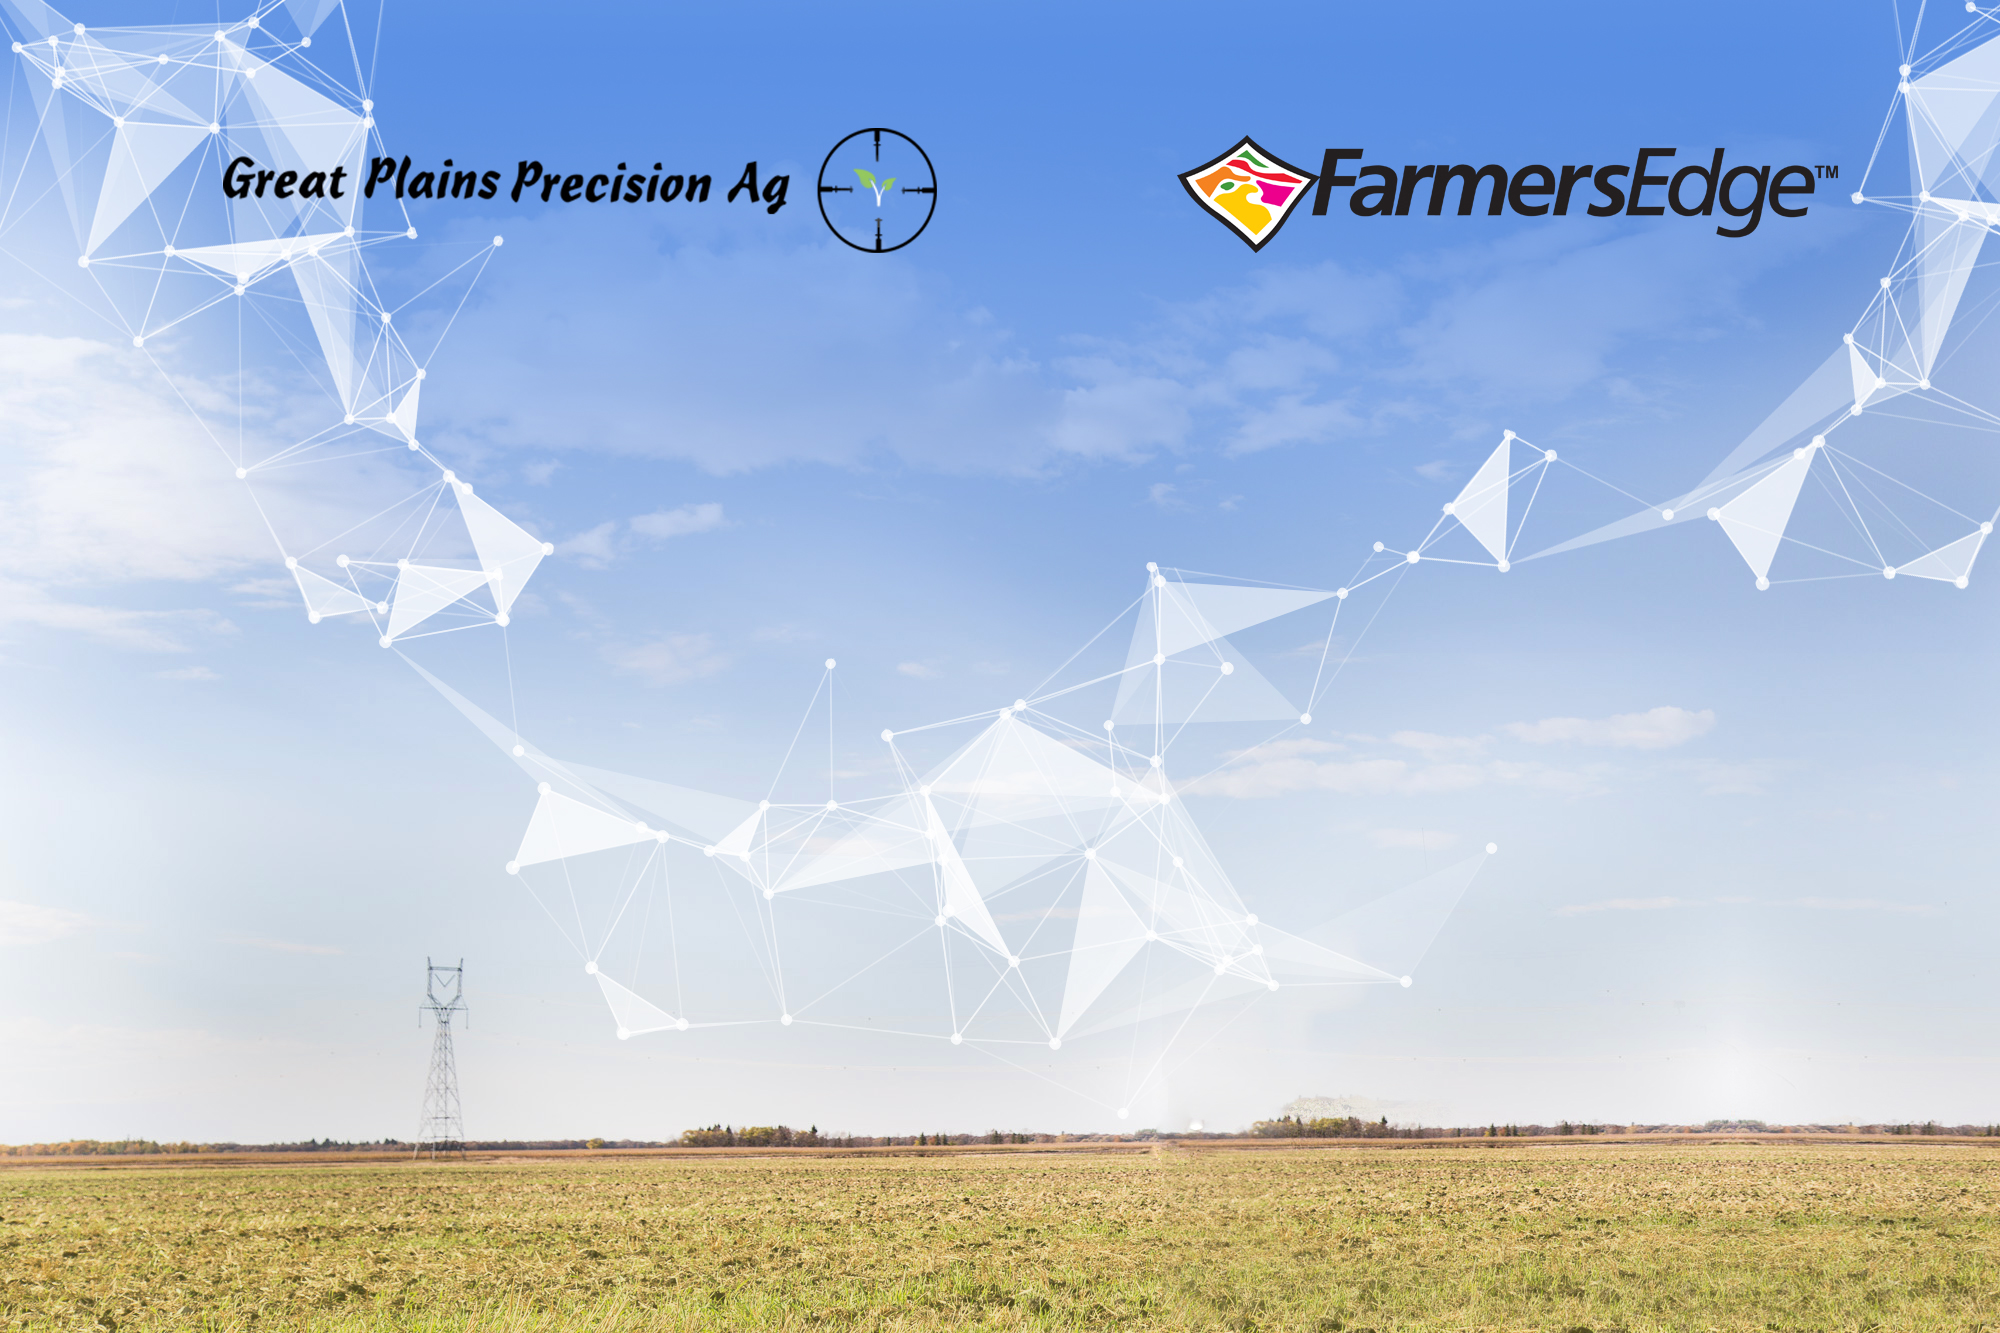 Farmers Edge Partners with Great Plains Precision Ag, Inc. to Empower More U.S. Growers with Comprehensive Precision Data